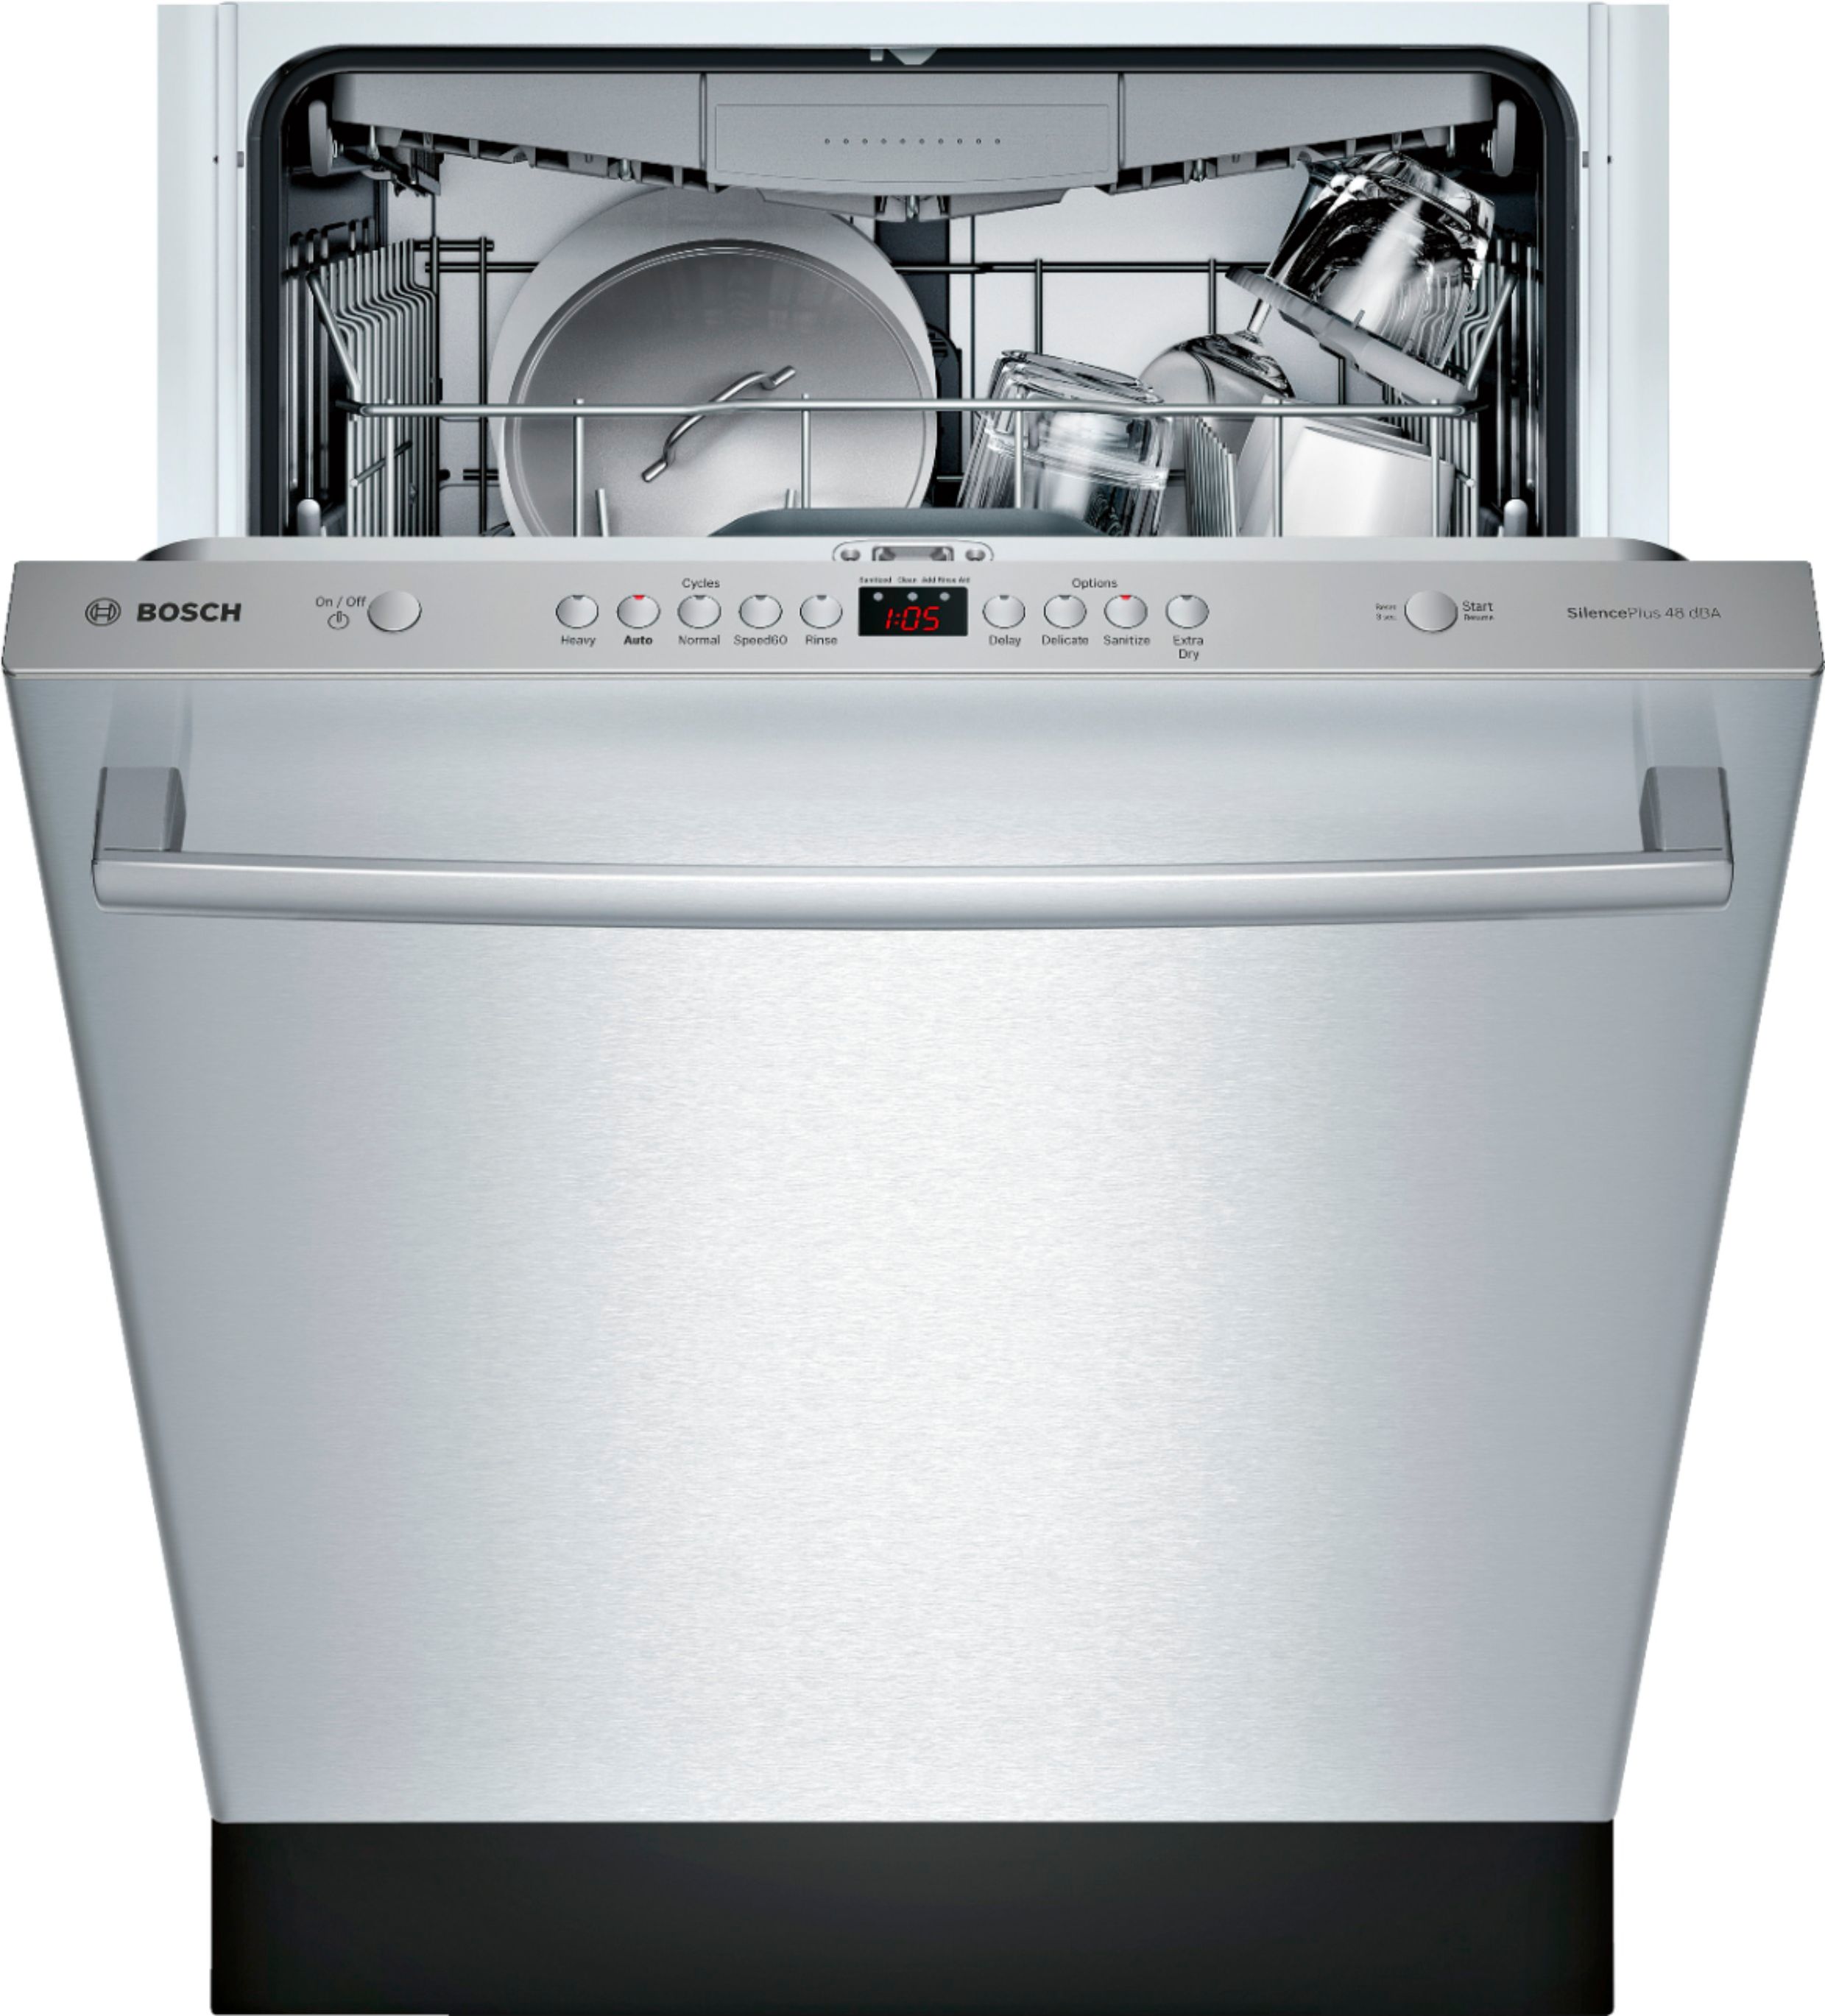 Bosch 100 Series 24" Top Control Built-In Dishwasher with Stainless Steel Stainless steel SHXM4AY55N - Best Buy